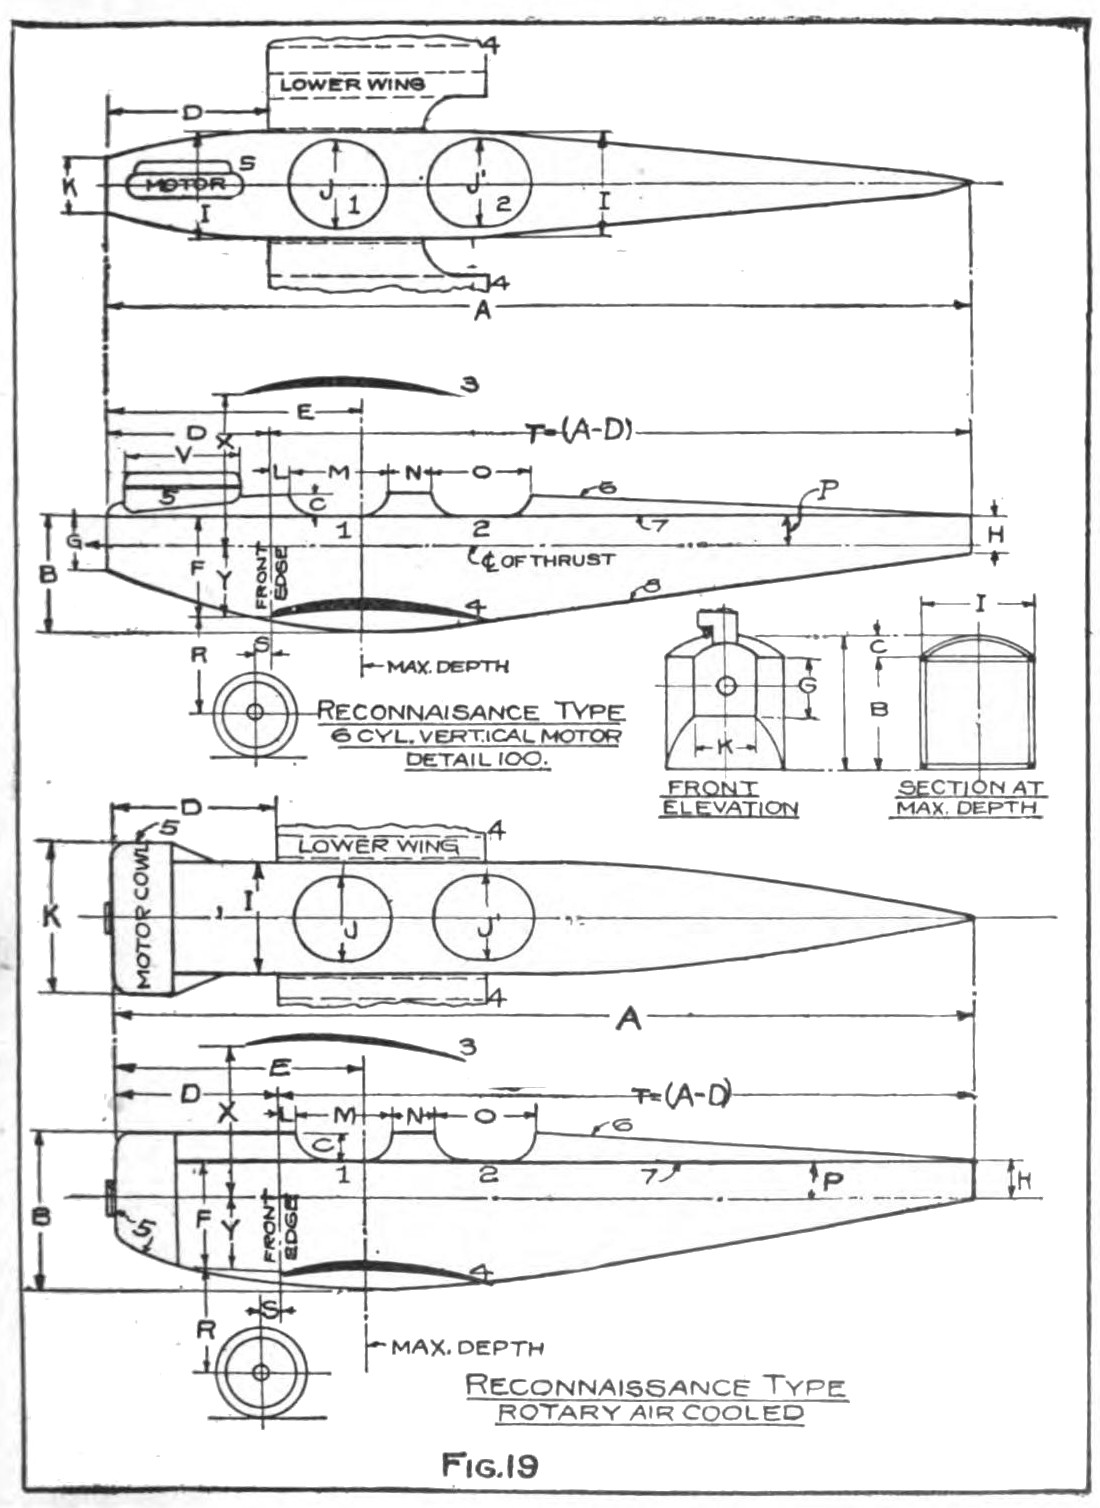 Fig. 19. Fuselage Dimension Chart for Two Place Aeroplane Fuselage.